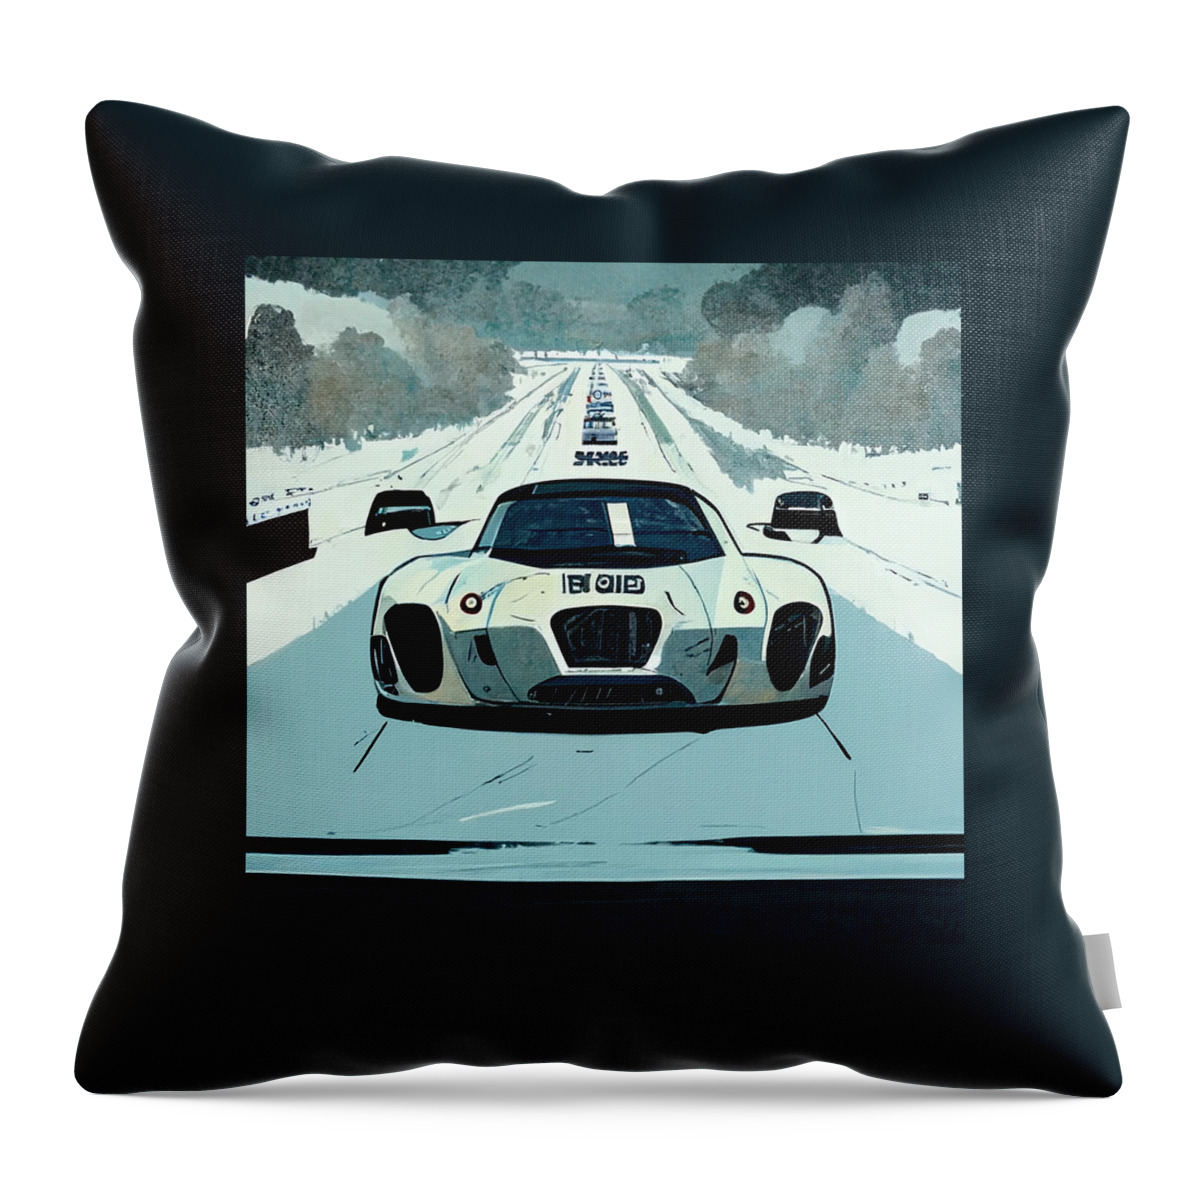 Cool Cartoon The Stig Top Gear Show Driving A Car B4171111 5f46 4446 8662  5761ee616a14 Throw Pillow by MotionAge Designs - Pixels